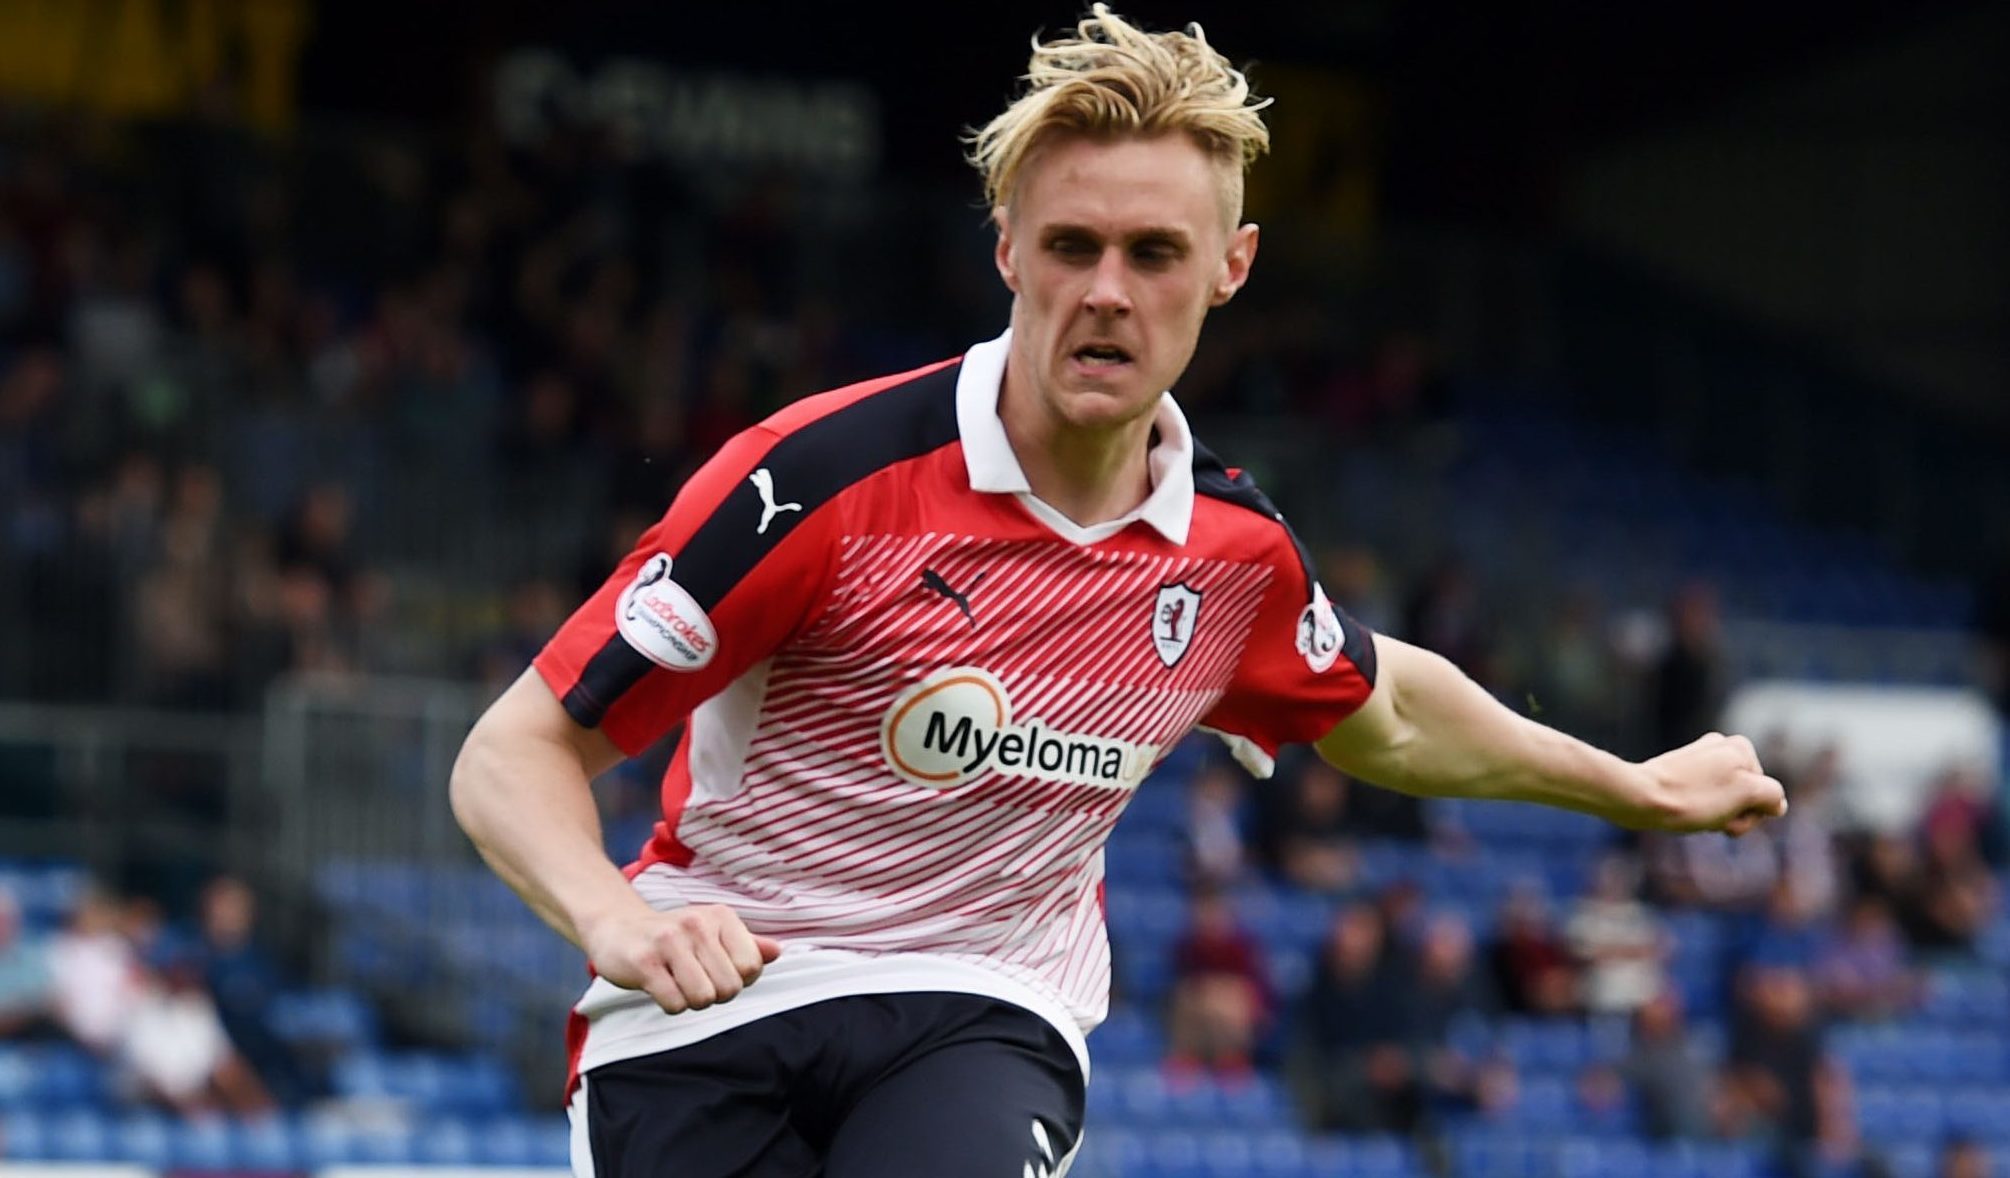 Kevin McHattie returns to squad after injury.